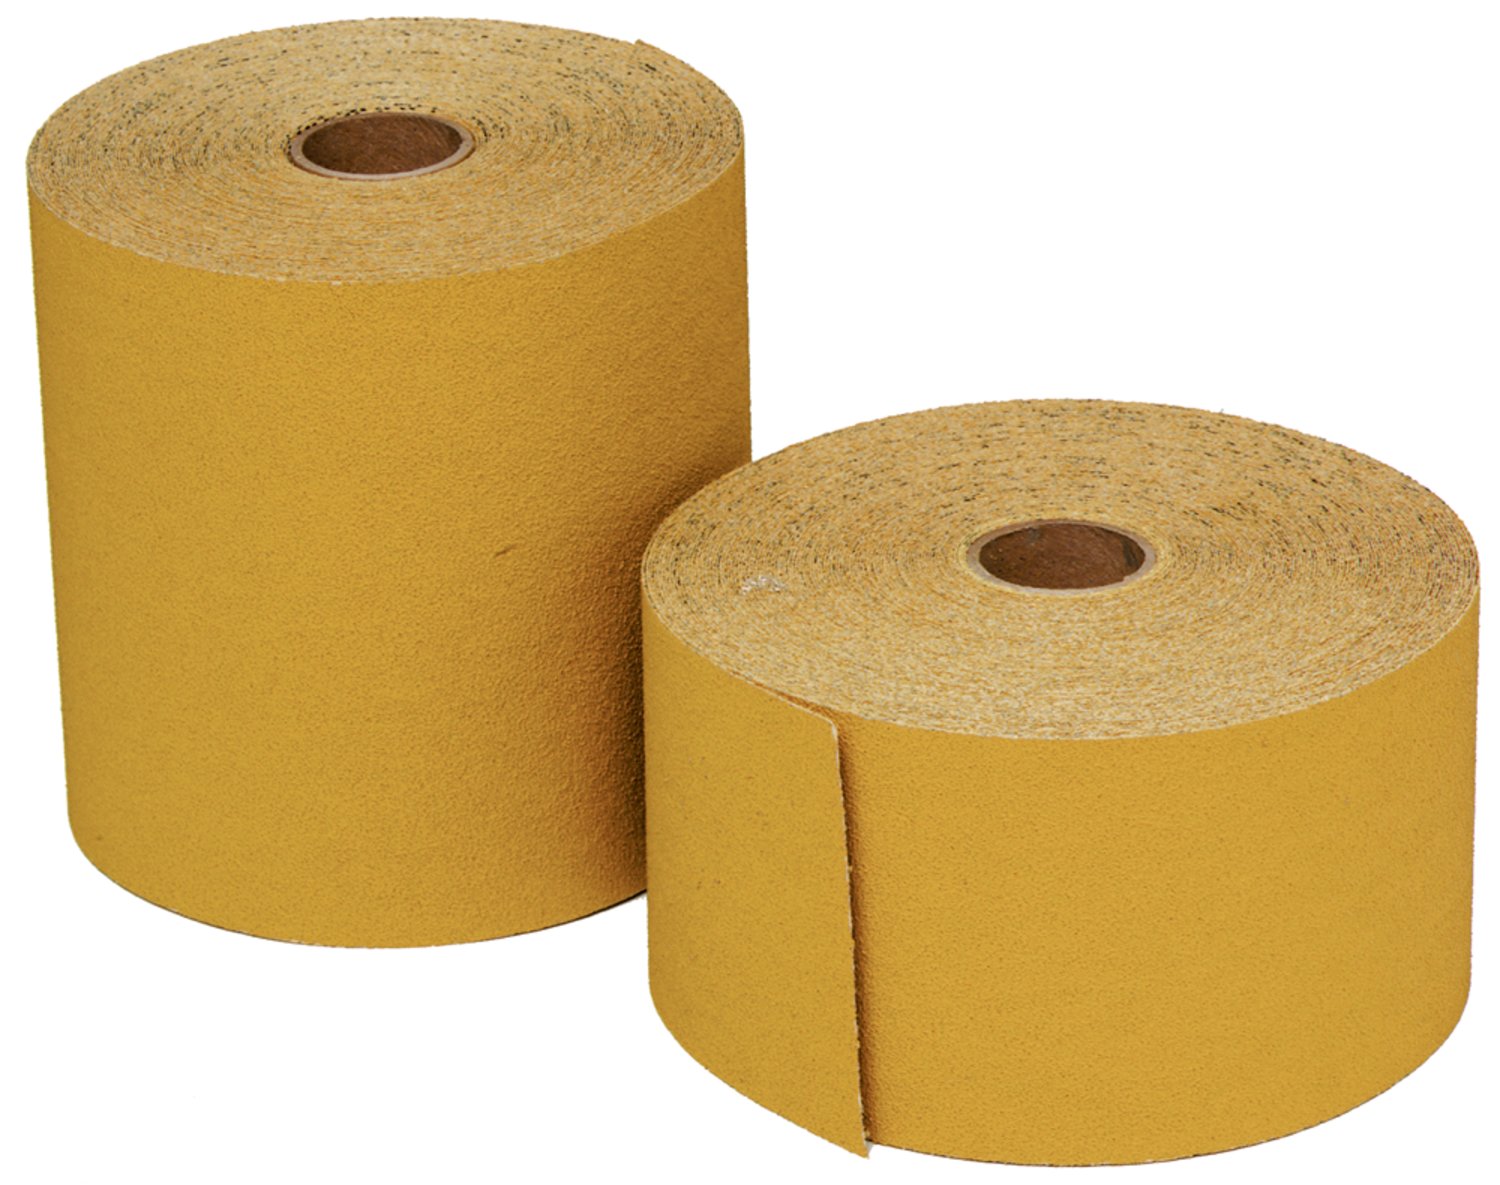 7100109514 - 3M Stikit Gold Paper Roll 216U, P80 A-weight, Config